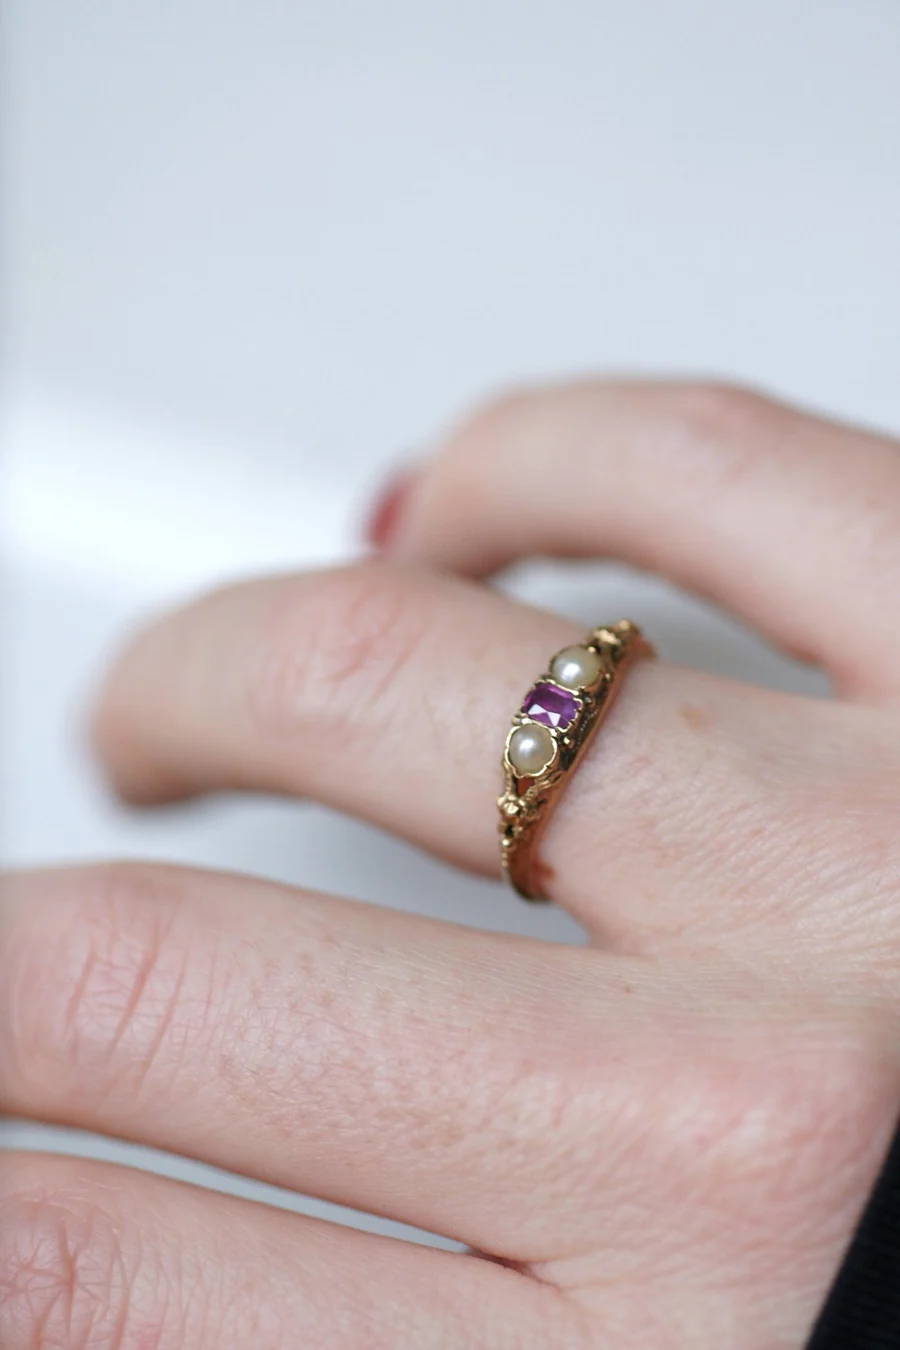 Ruby and pearls on gold band ring - Galerie Pénélope